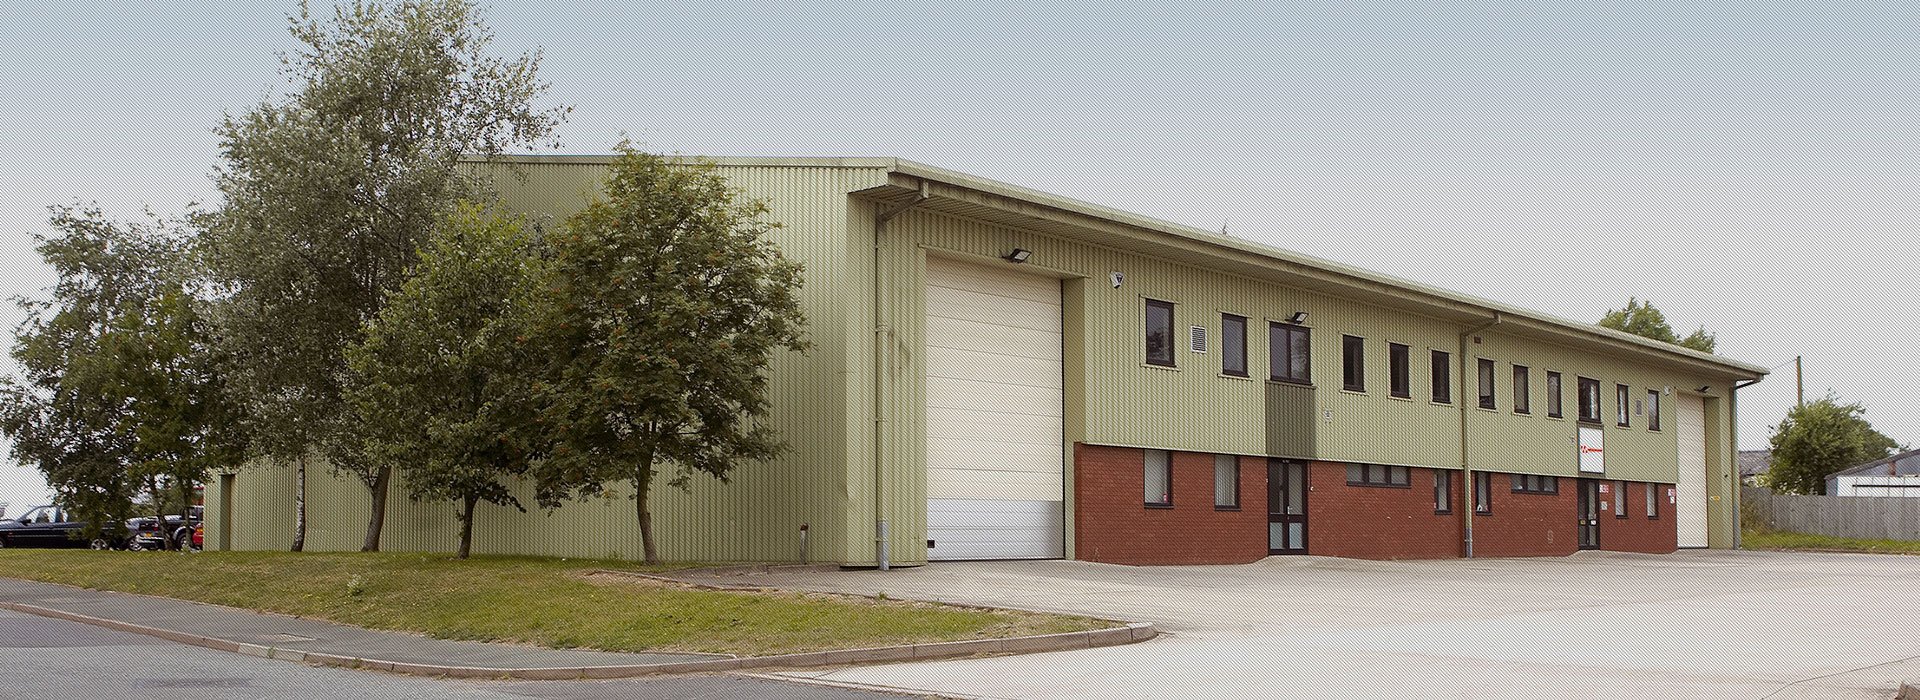 The Needham Group Waymills Industrial Estate Whitchurch Shropshire